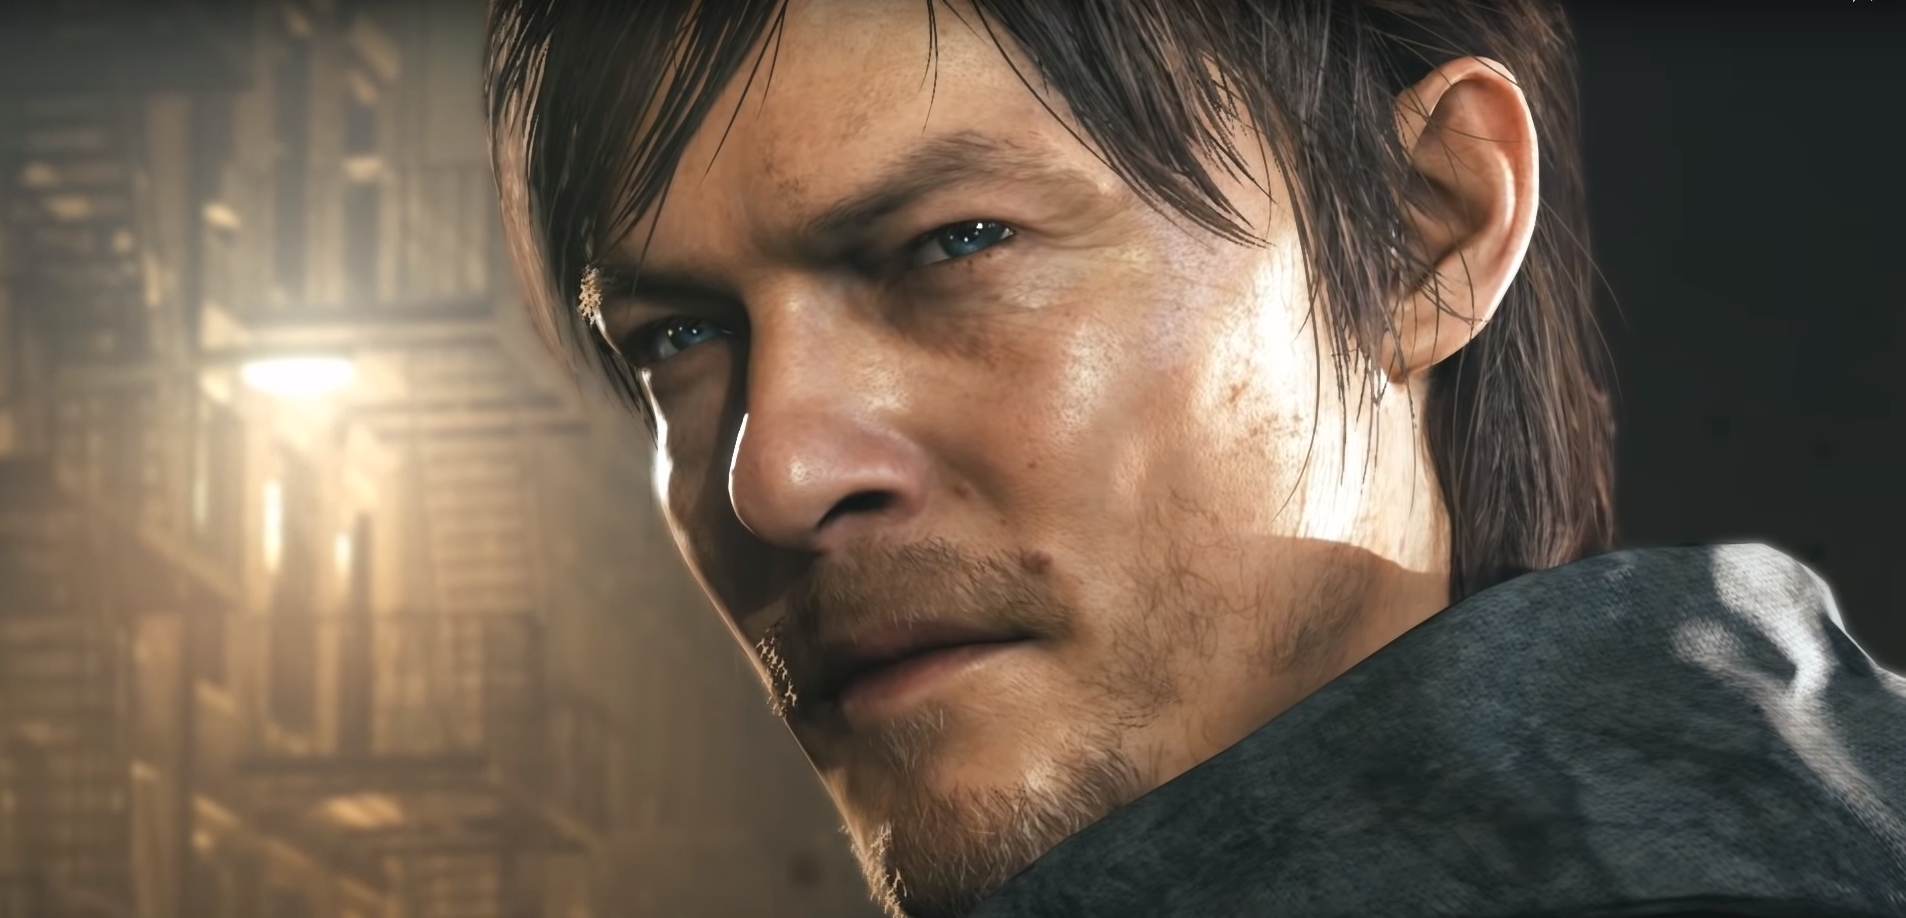 Masahiro Ito of Silent Hill Rumored to be Working on Hideo Kojima’s Next Horror Title